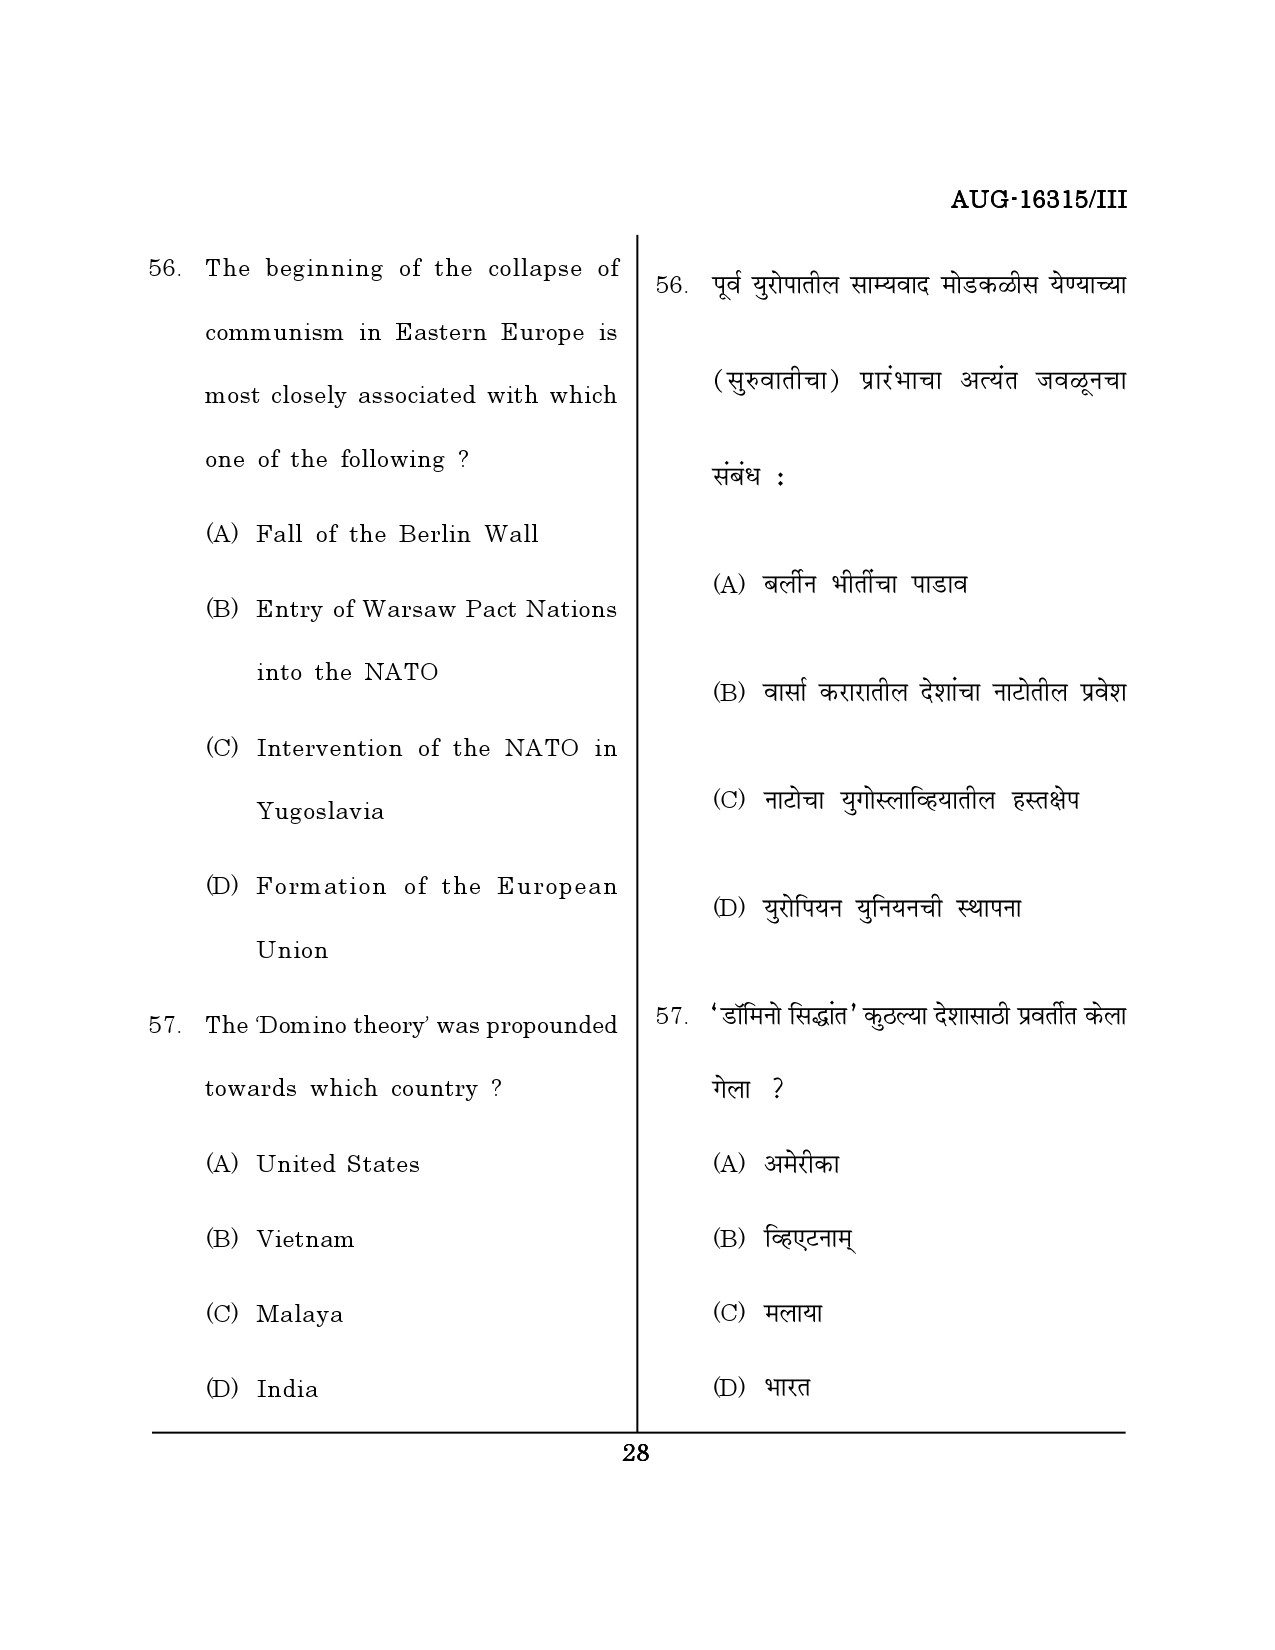 Maharashtra SET Defence and Strategic Studies Question Paper III August 2015 27